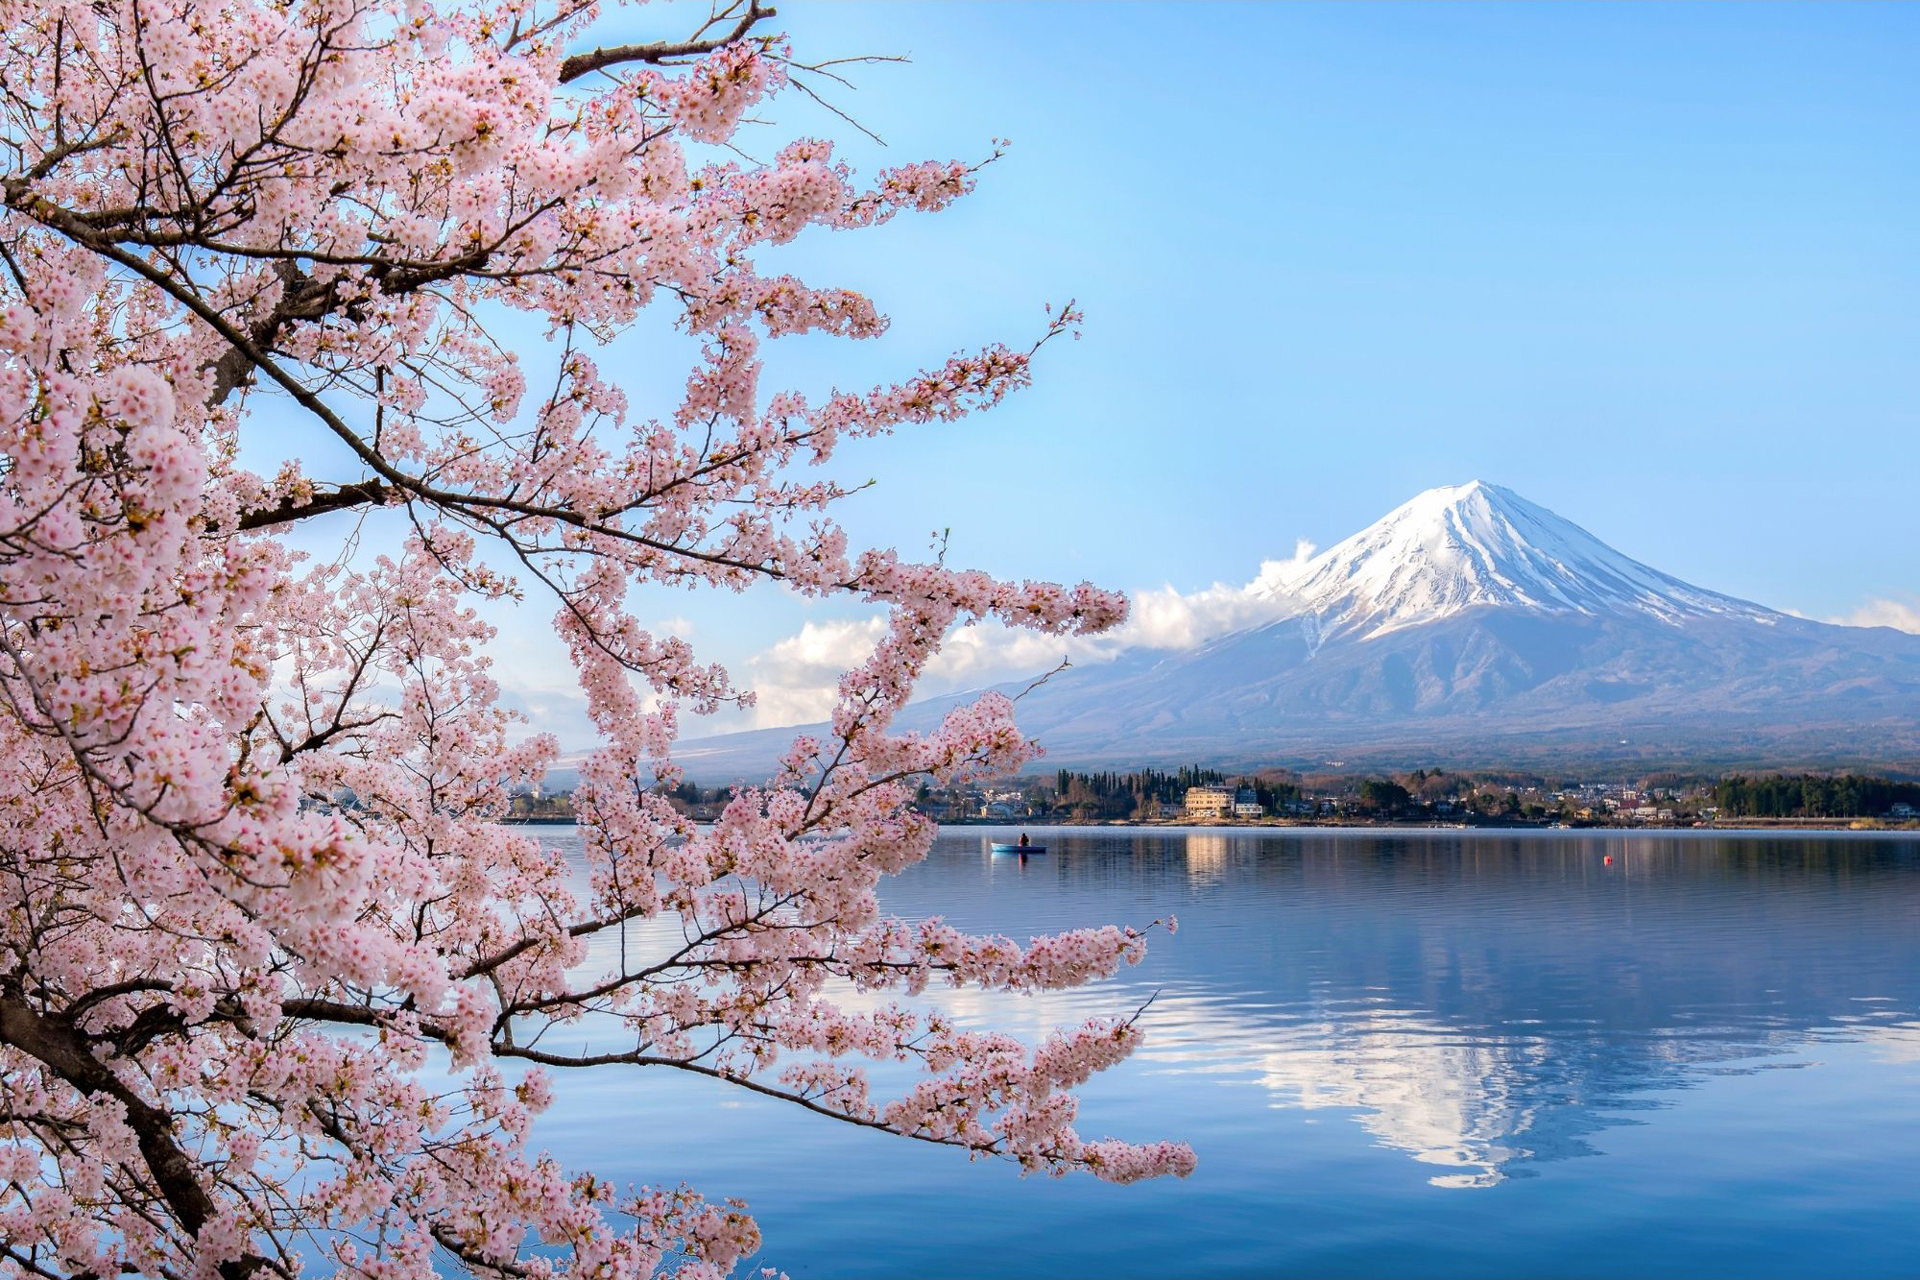 Mount Fuji in the background with cherry blossoms in the foreground